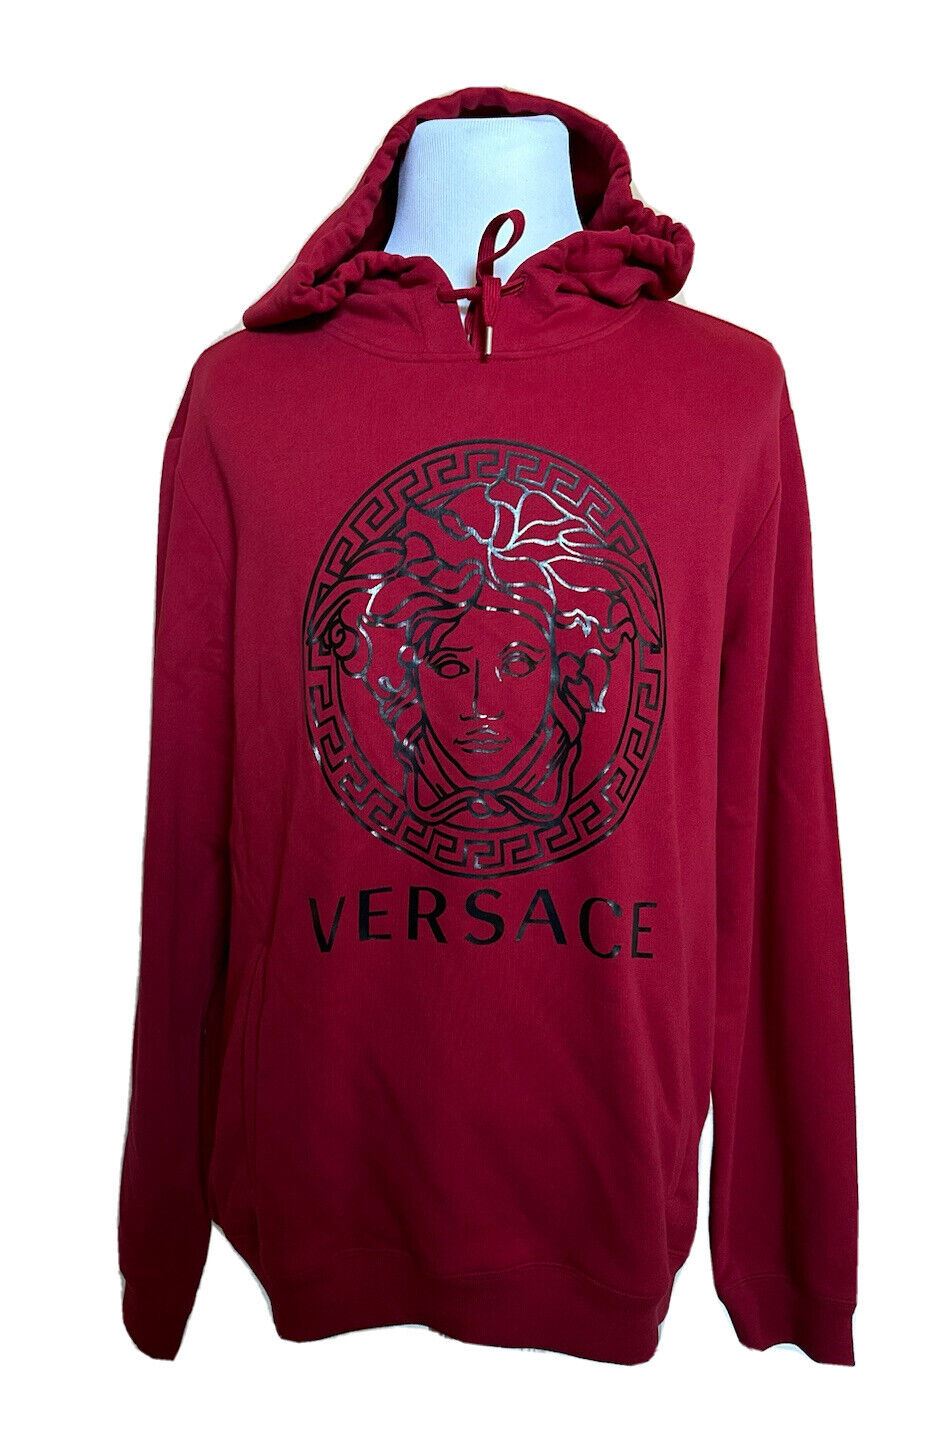 NWT $750 Versace Medusa Print Red Cotton Sweatshirt with Hoodie 5XL A89514S IT